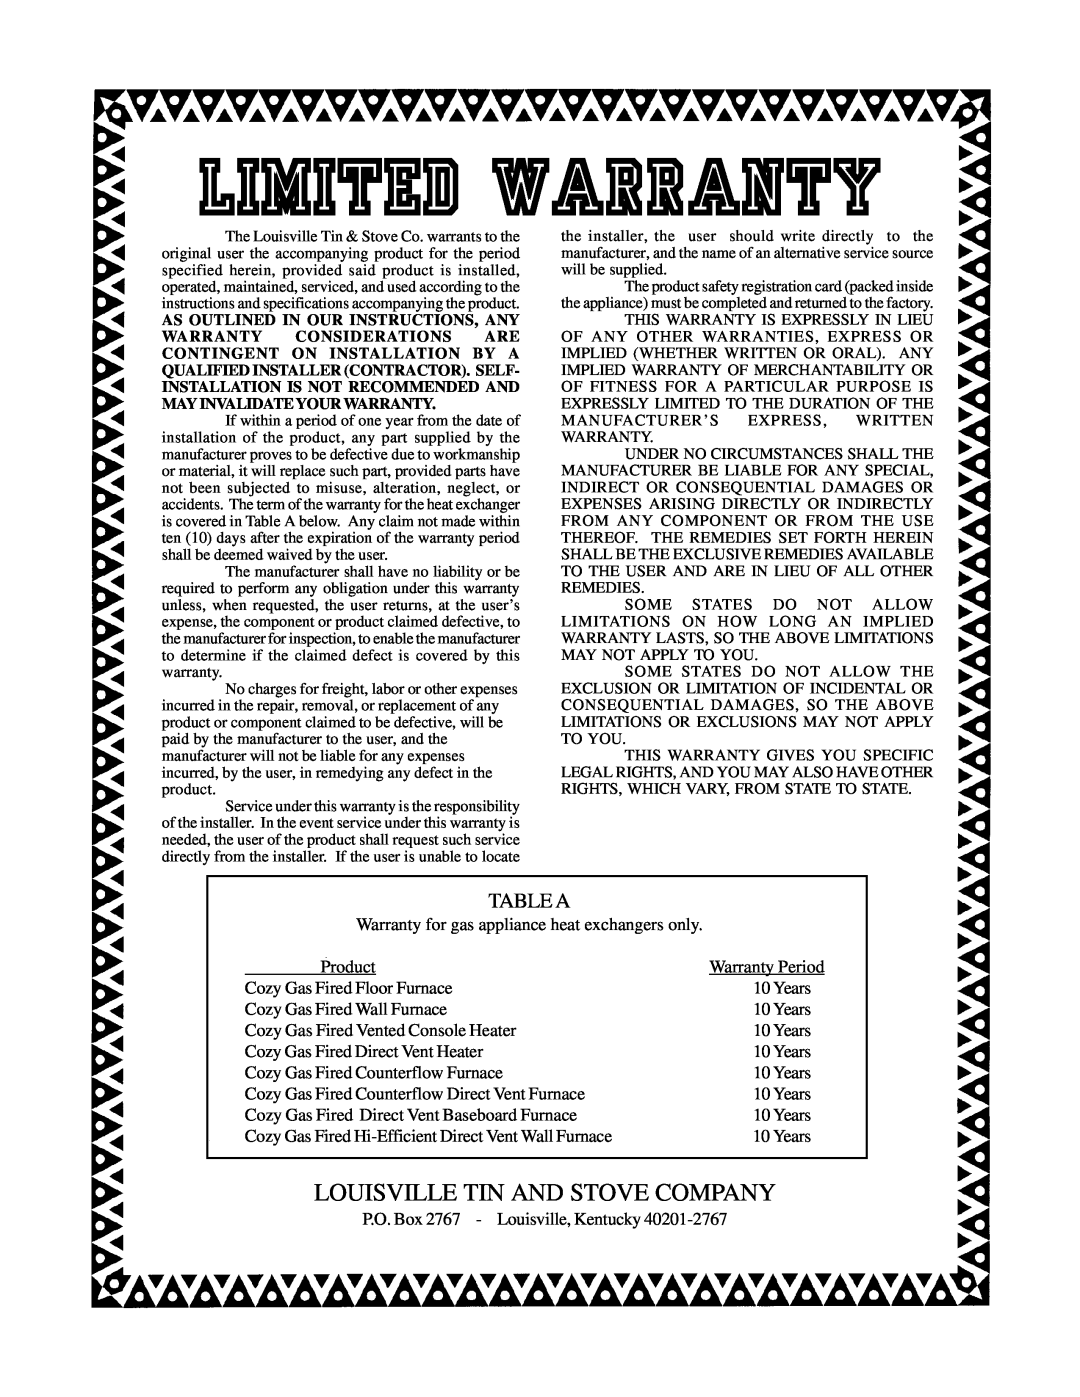 Louisville Tin and Stove VCR501A-H, VCR702A-H, VCR701A-H, VCR352A-H Limited Warranty, Louisville Tin And Stove Company 